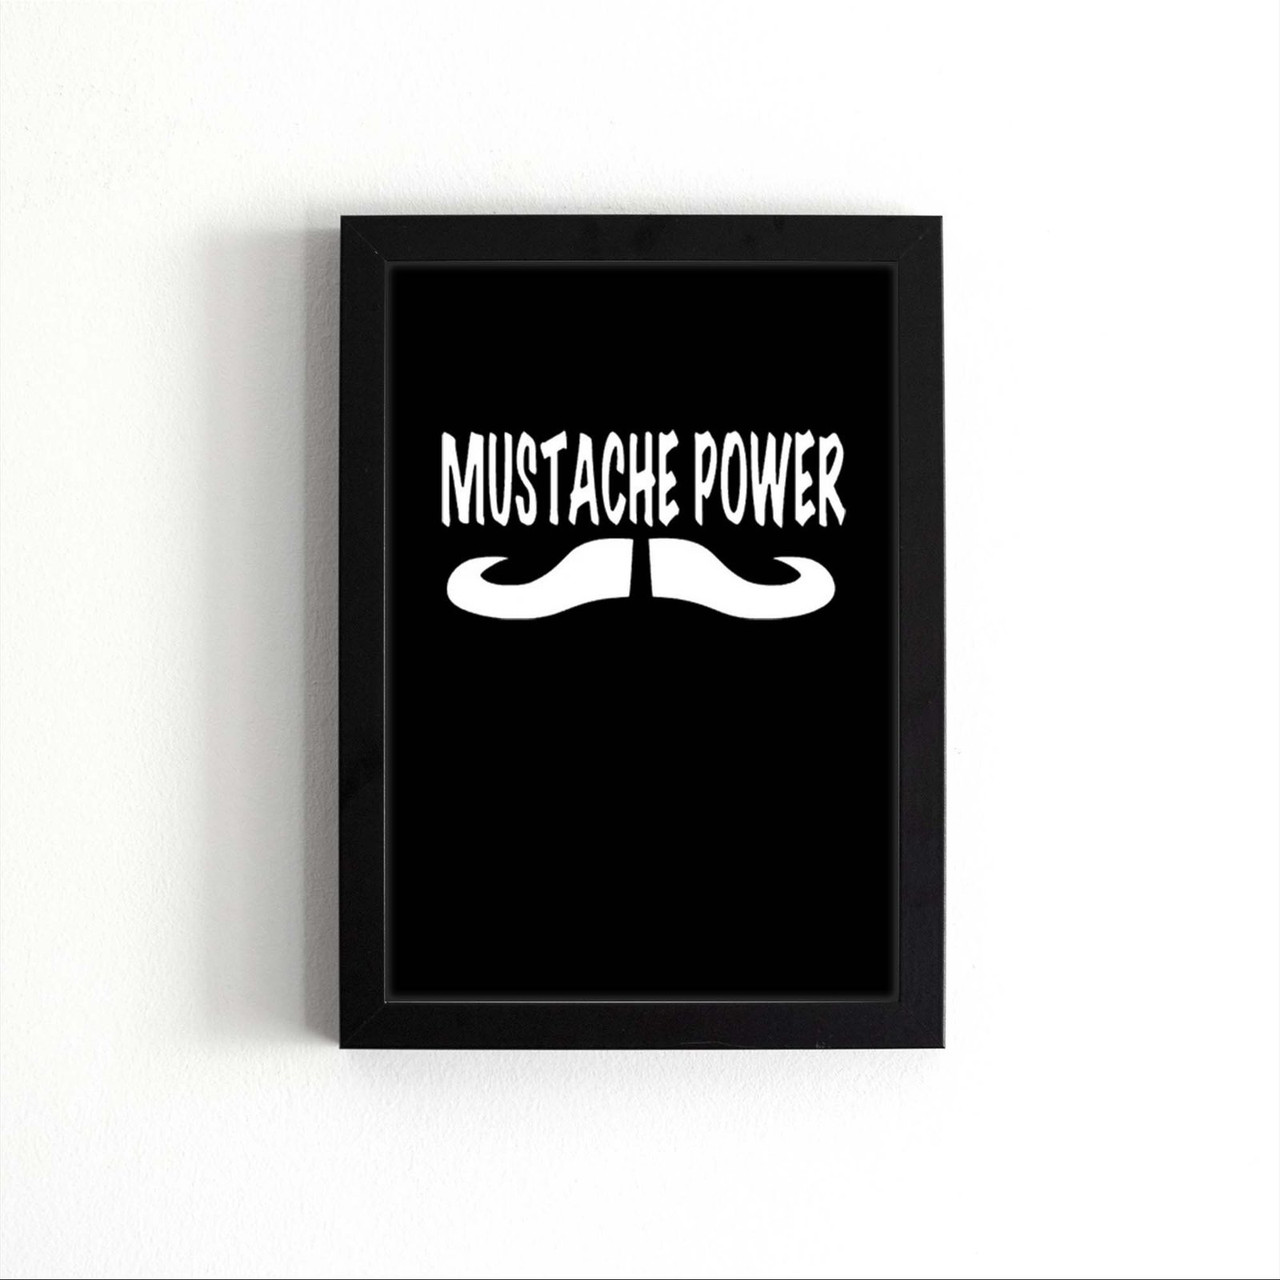 The power of the mustache